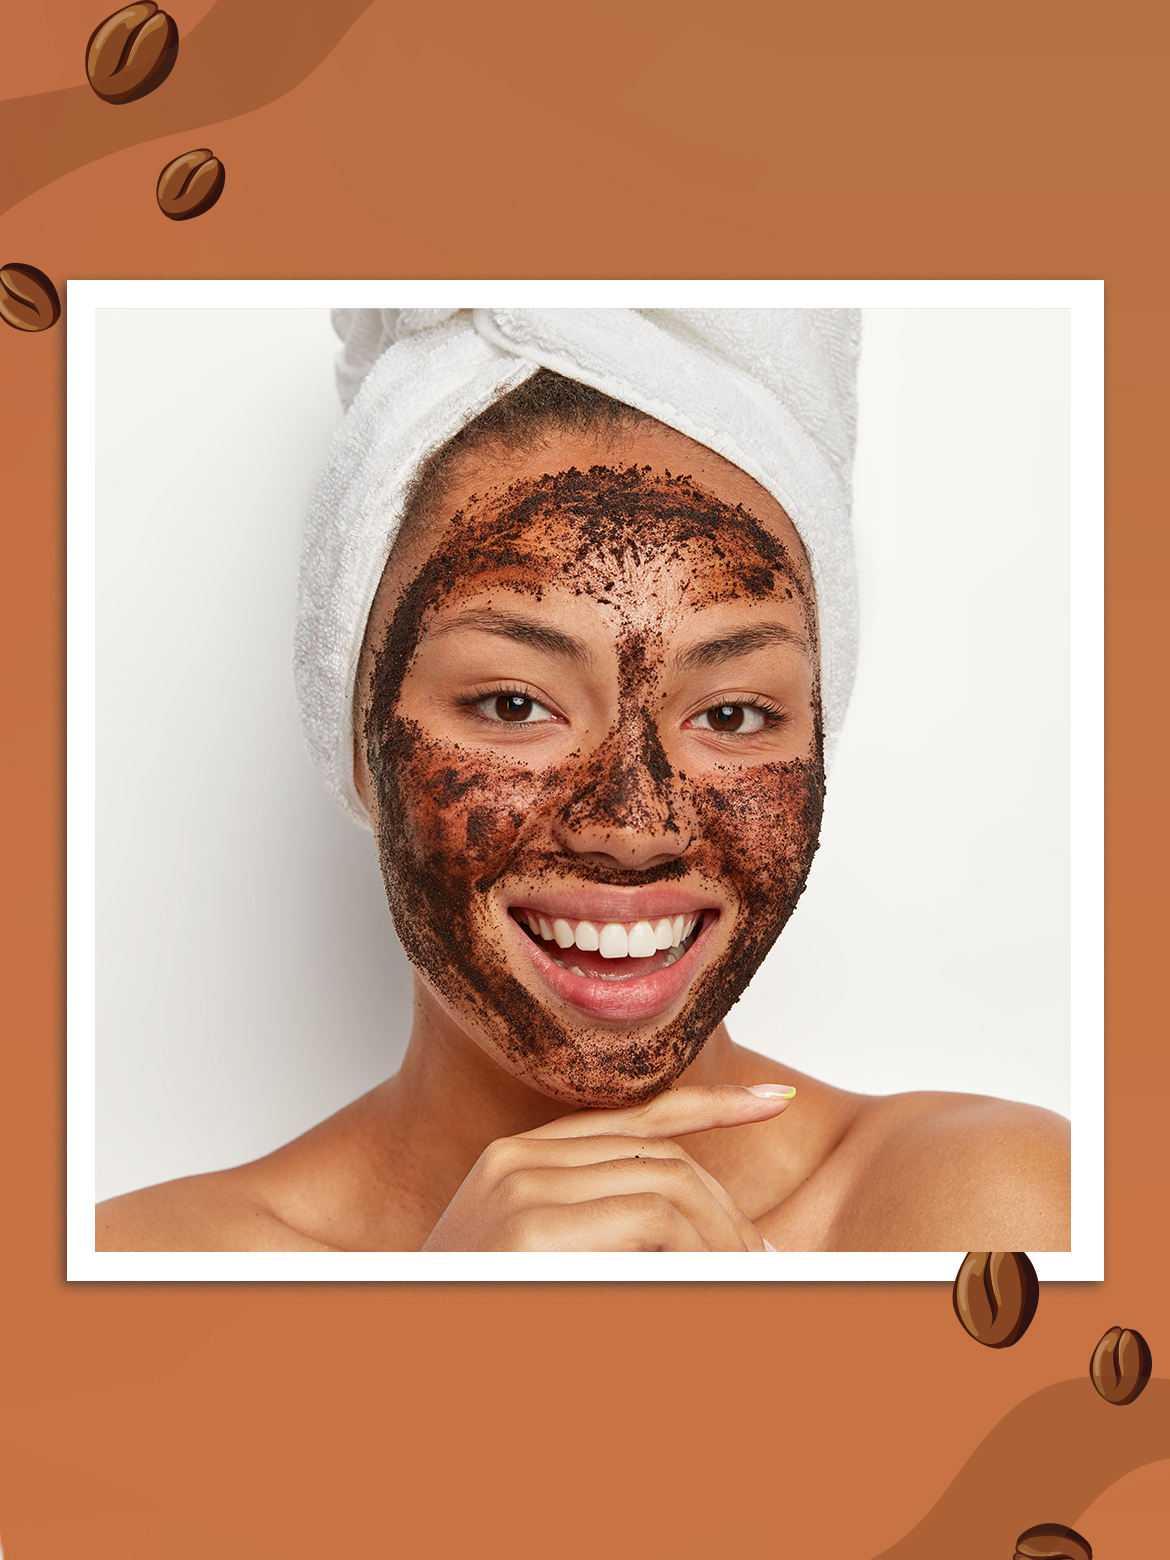 5 Diy Coffee Face Masks For Glowing Skin Instantly! - Sugar Cosmetics